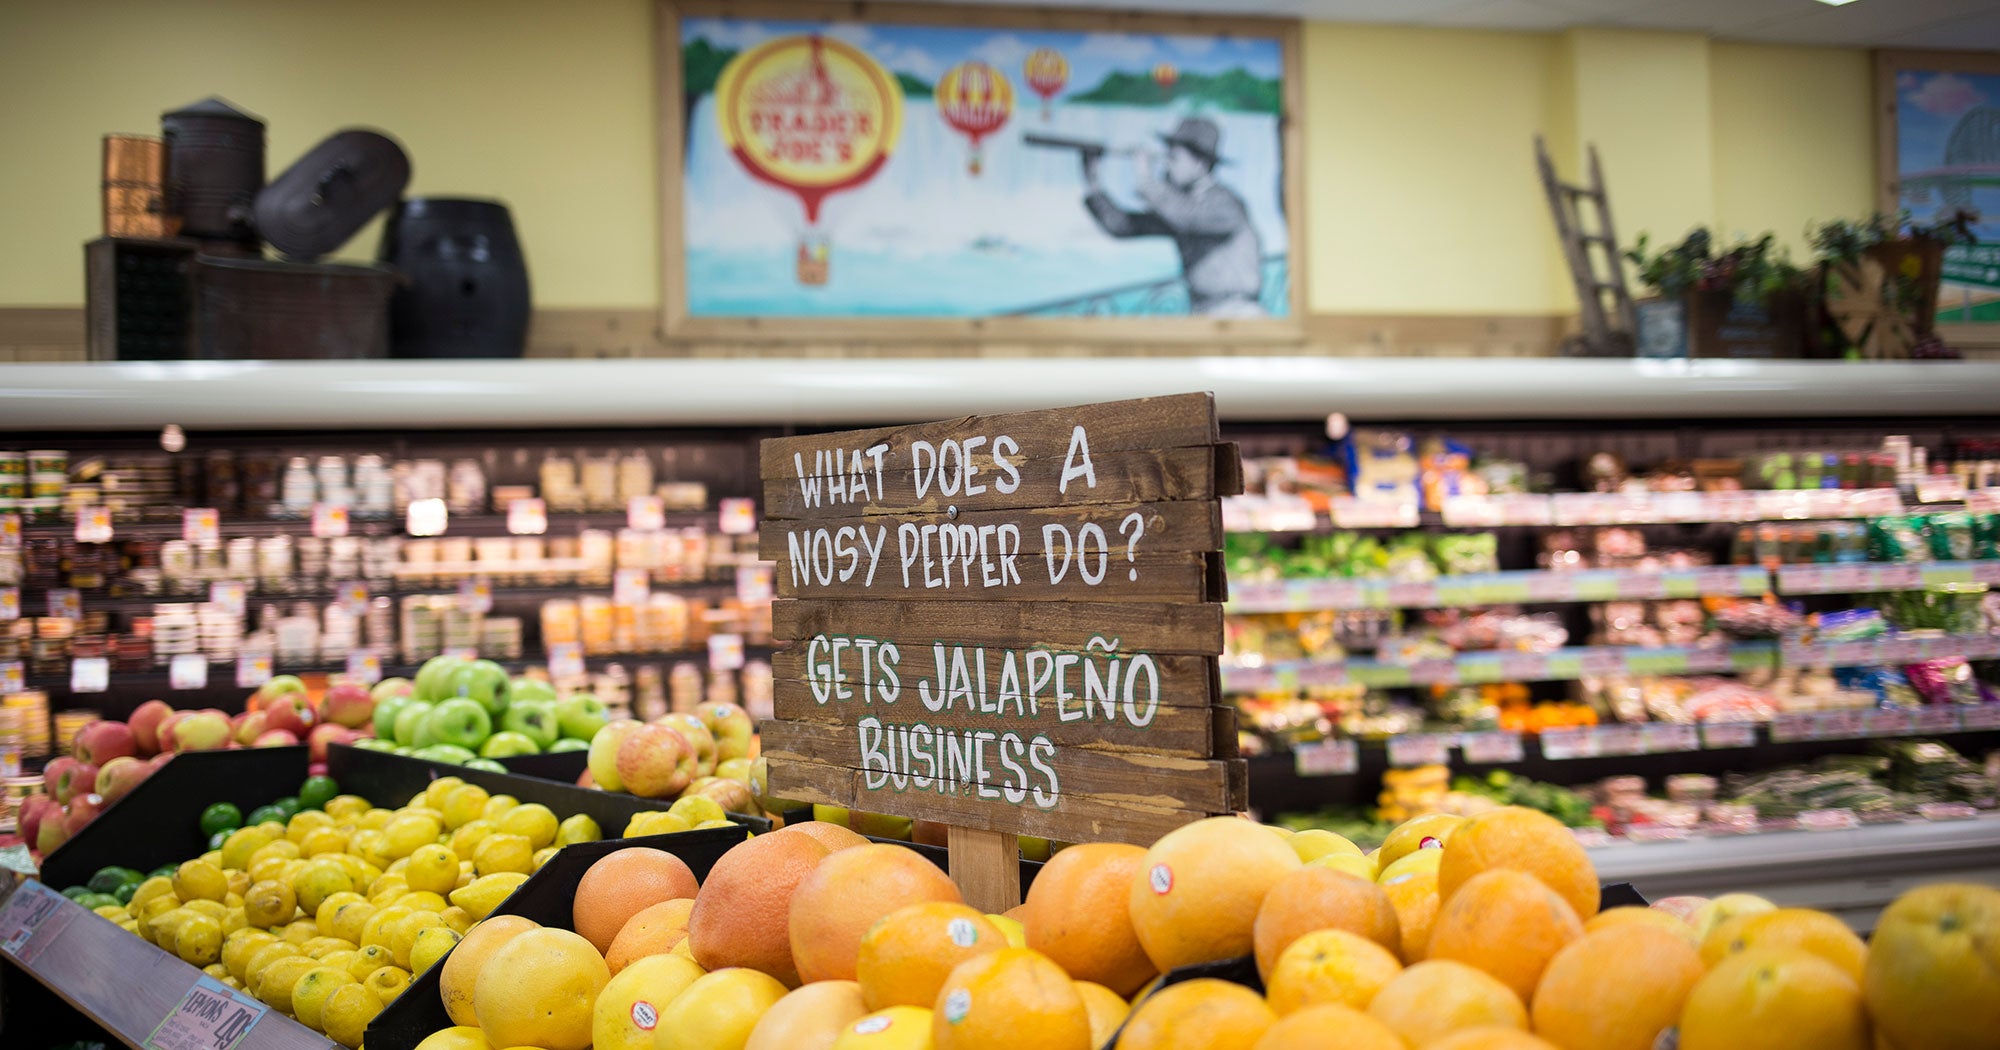 Trader Joe's founder Joe Coulombe passed away this week and the intern...